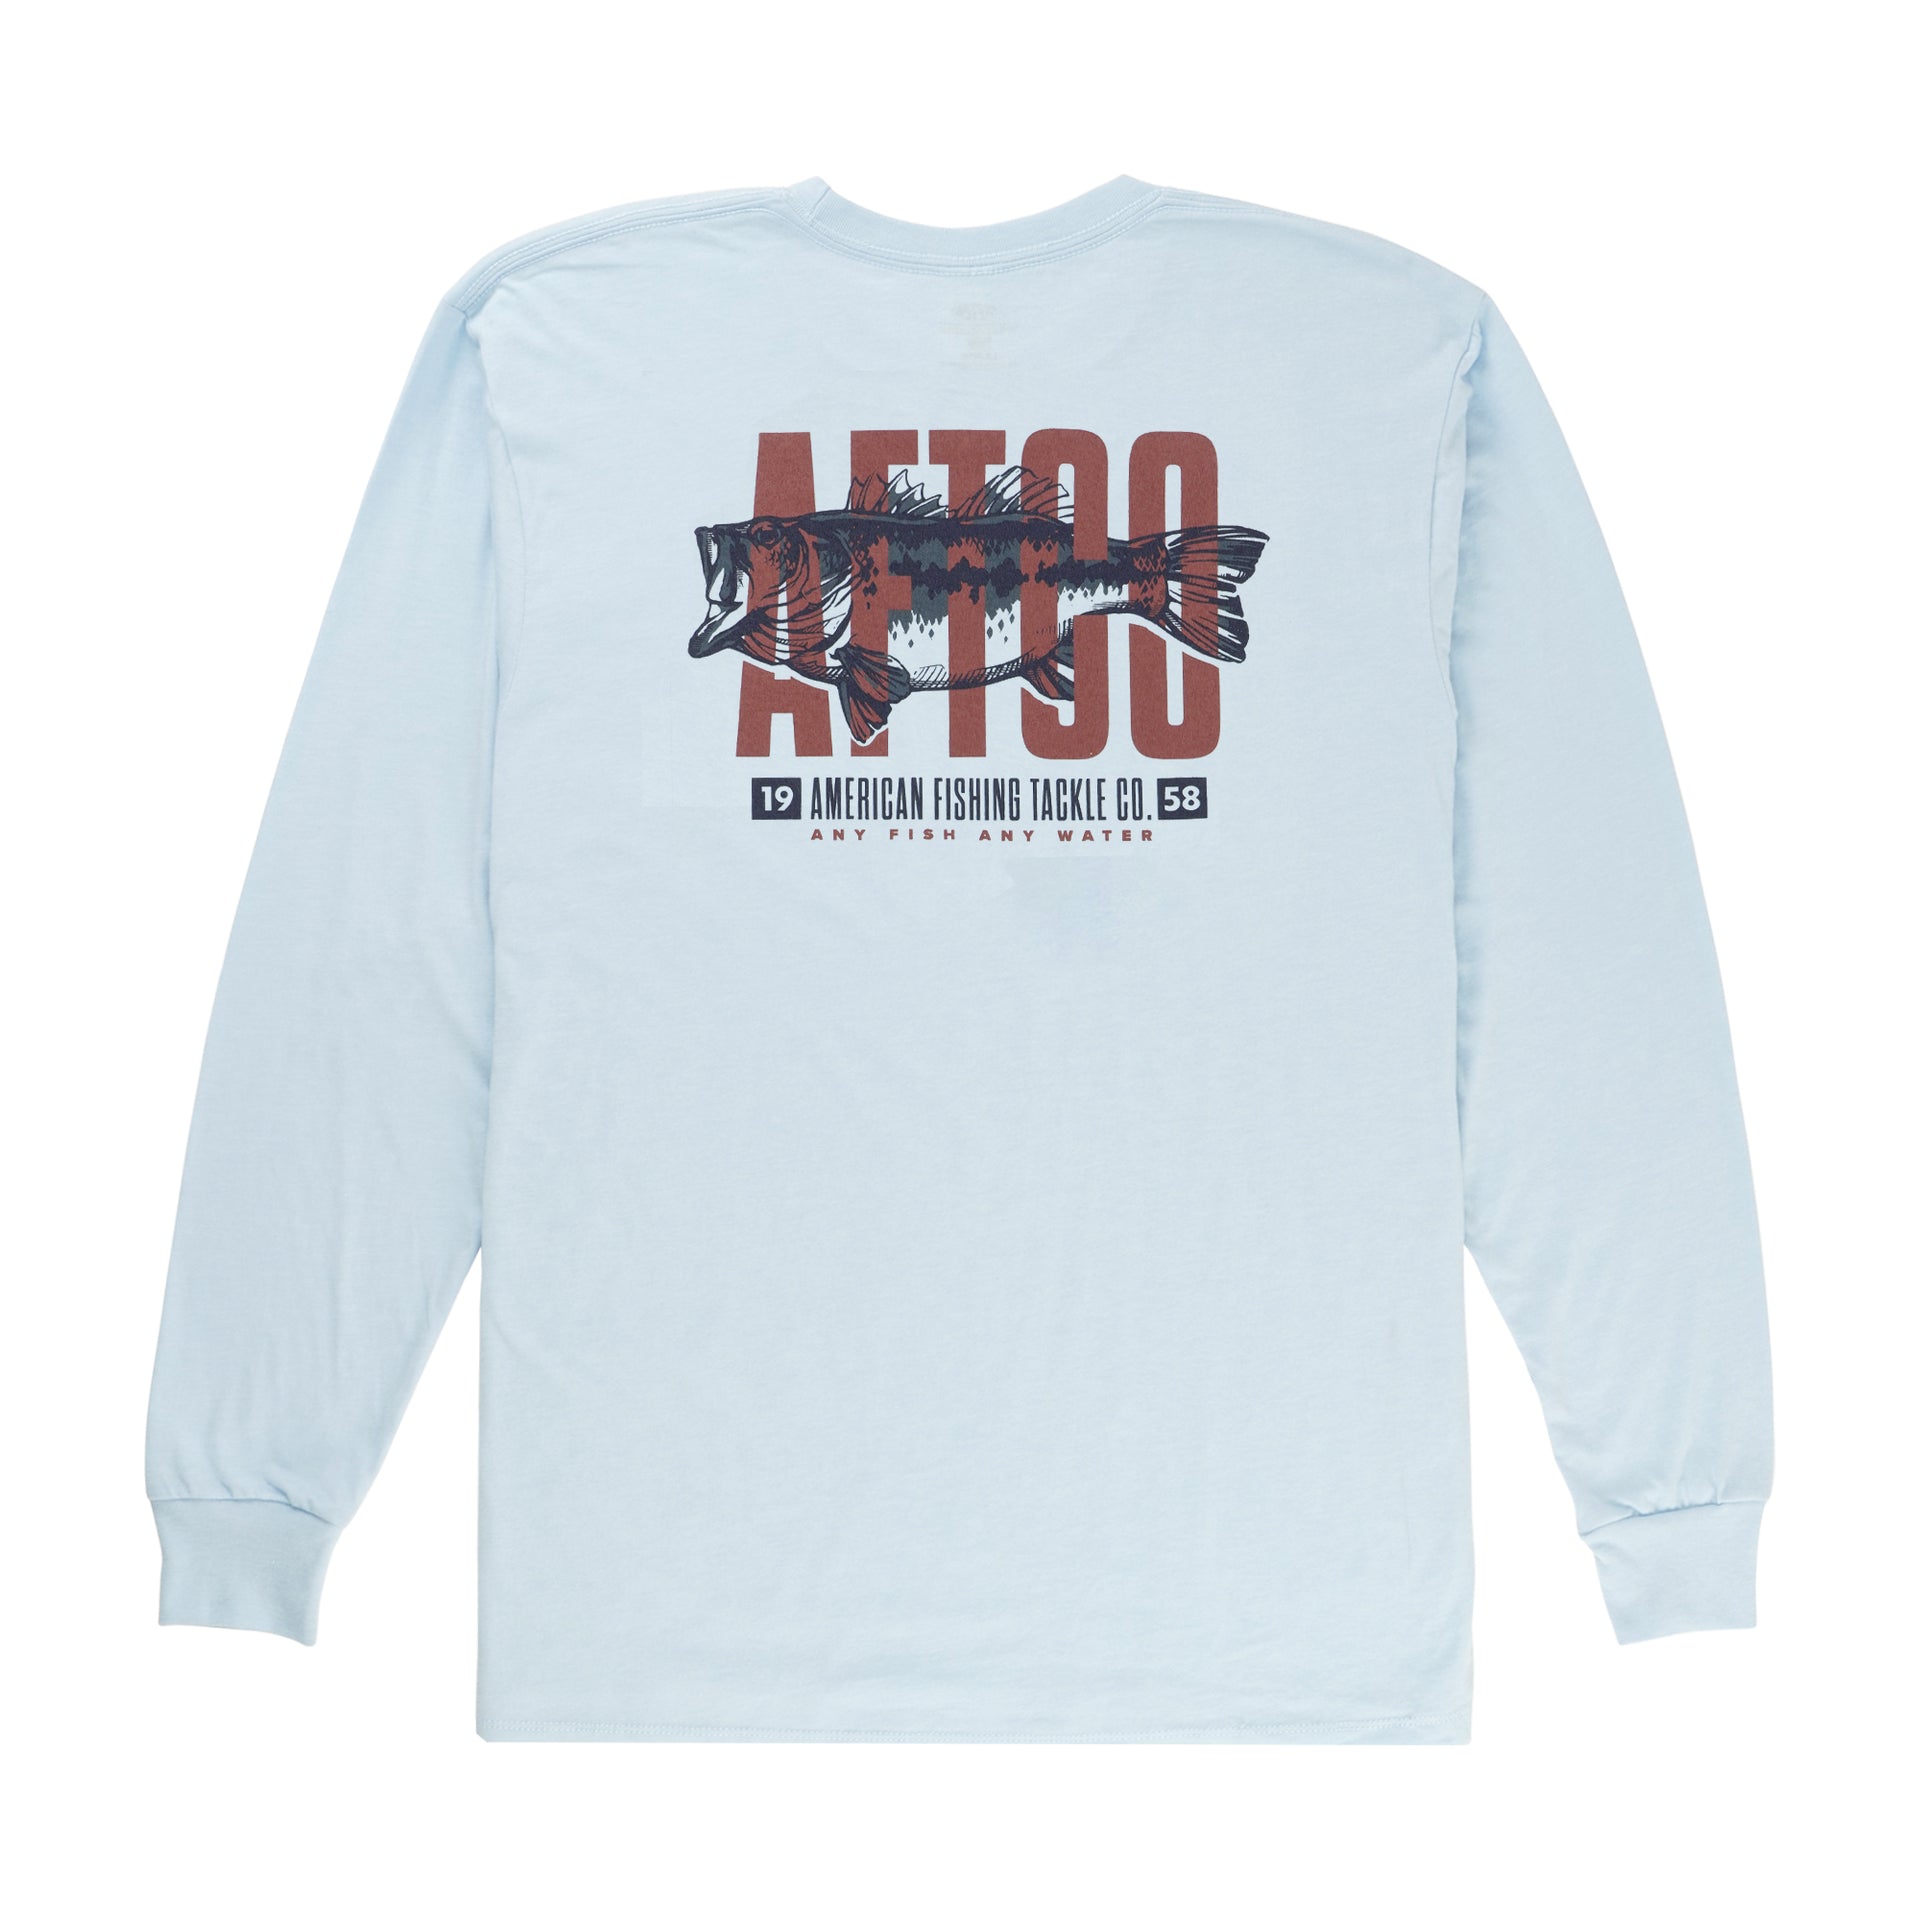 AFTCO Bass Patch Long Sleeve T-Shirt